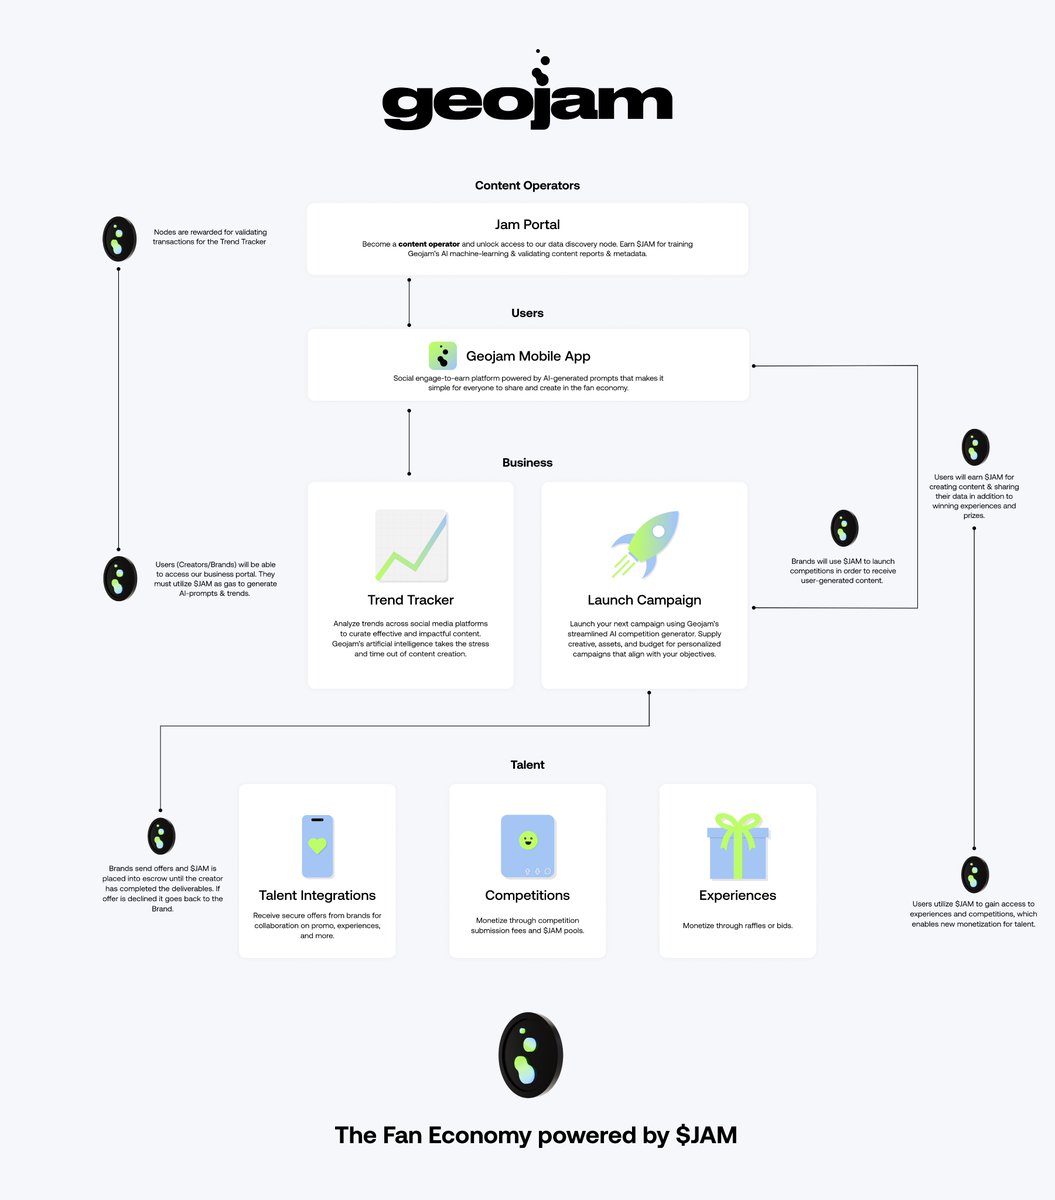 The $JAM Ecosystem in a nutshell!